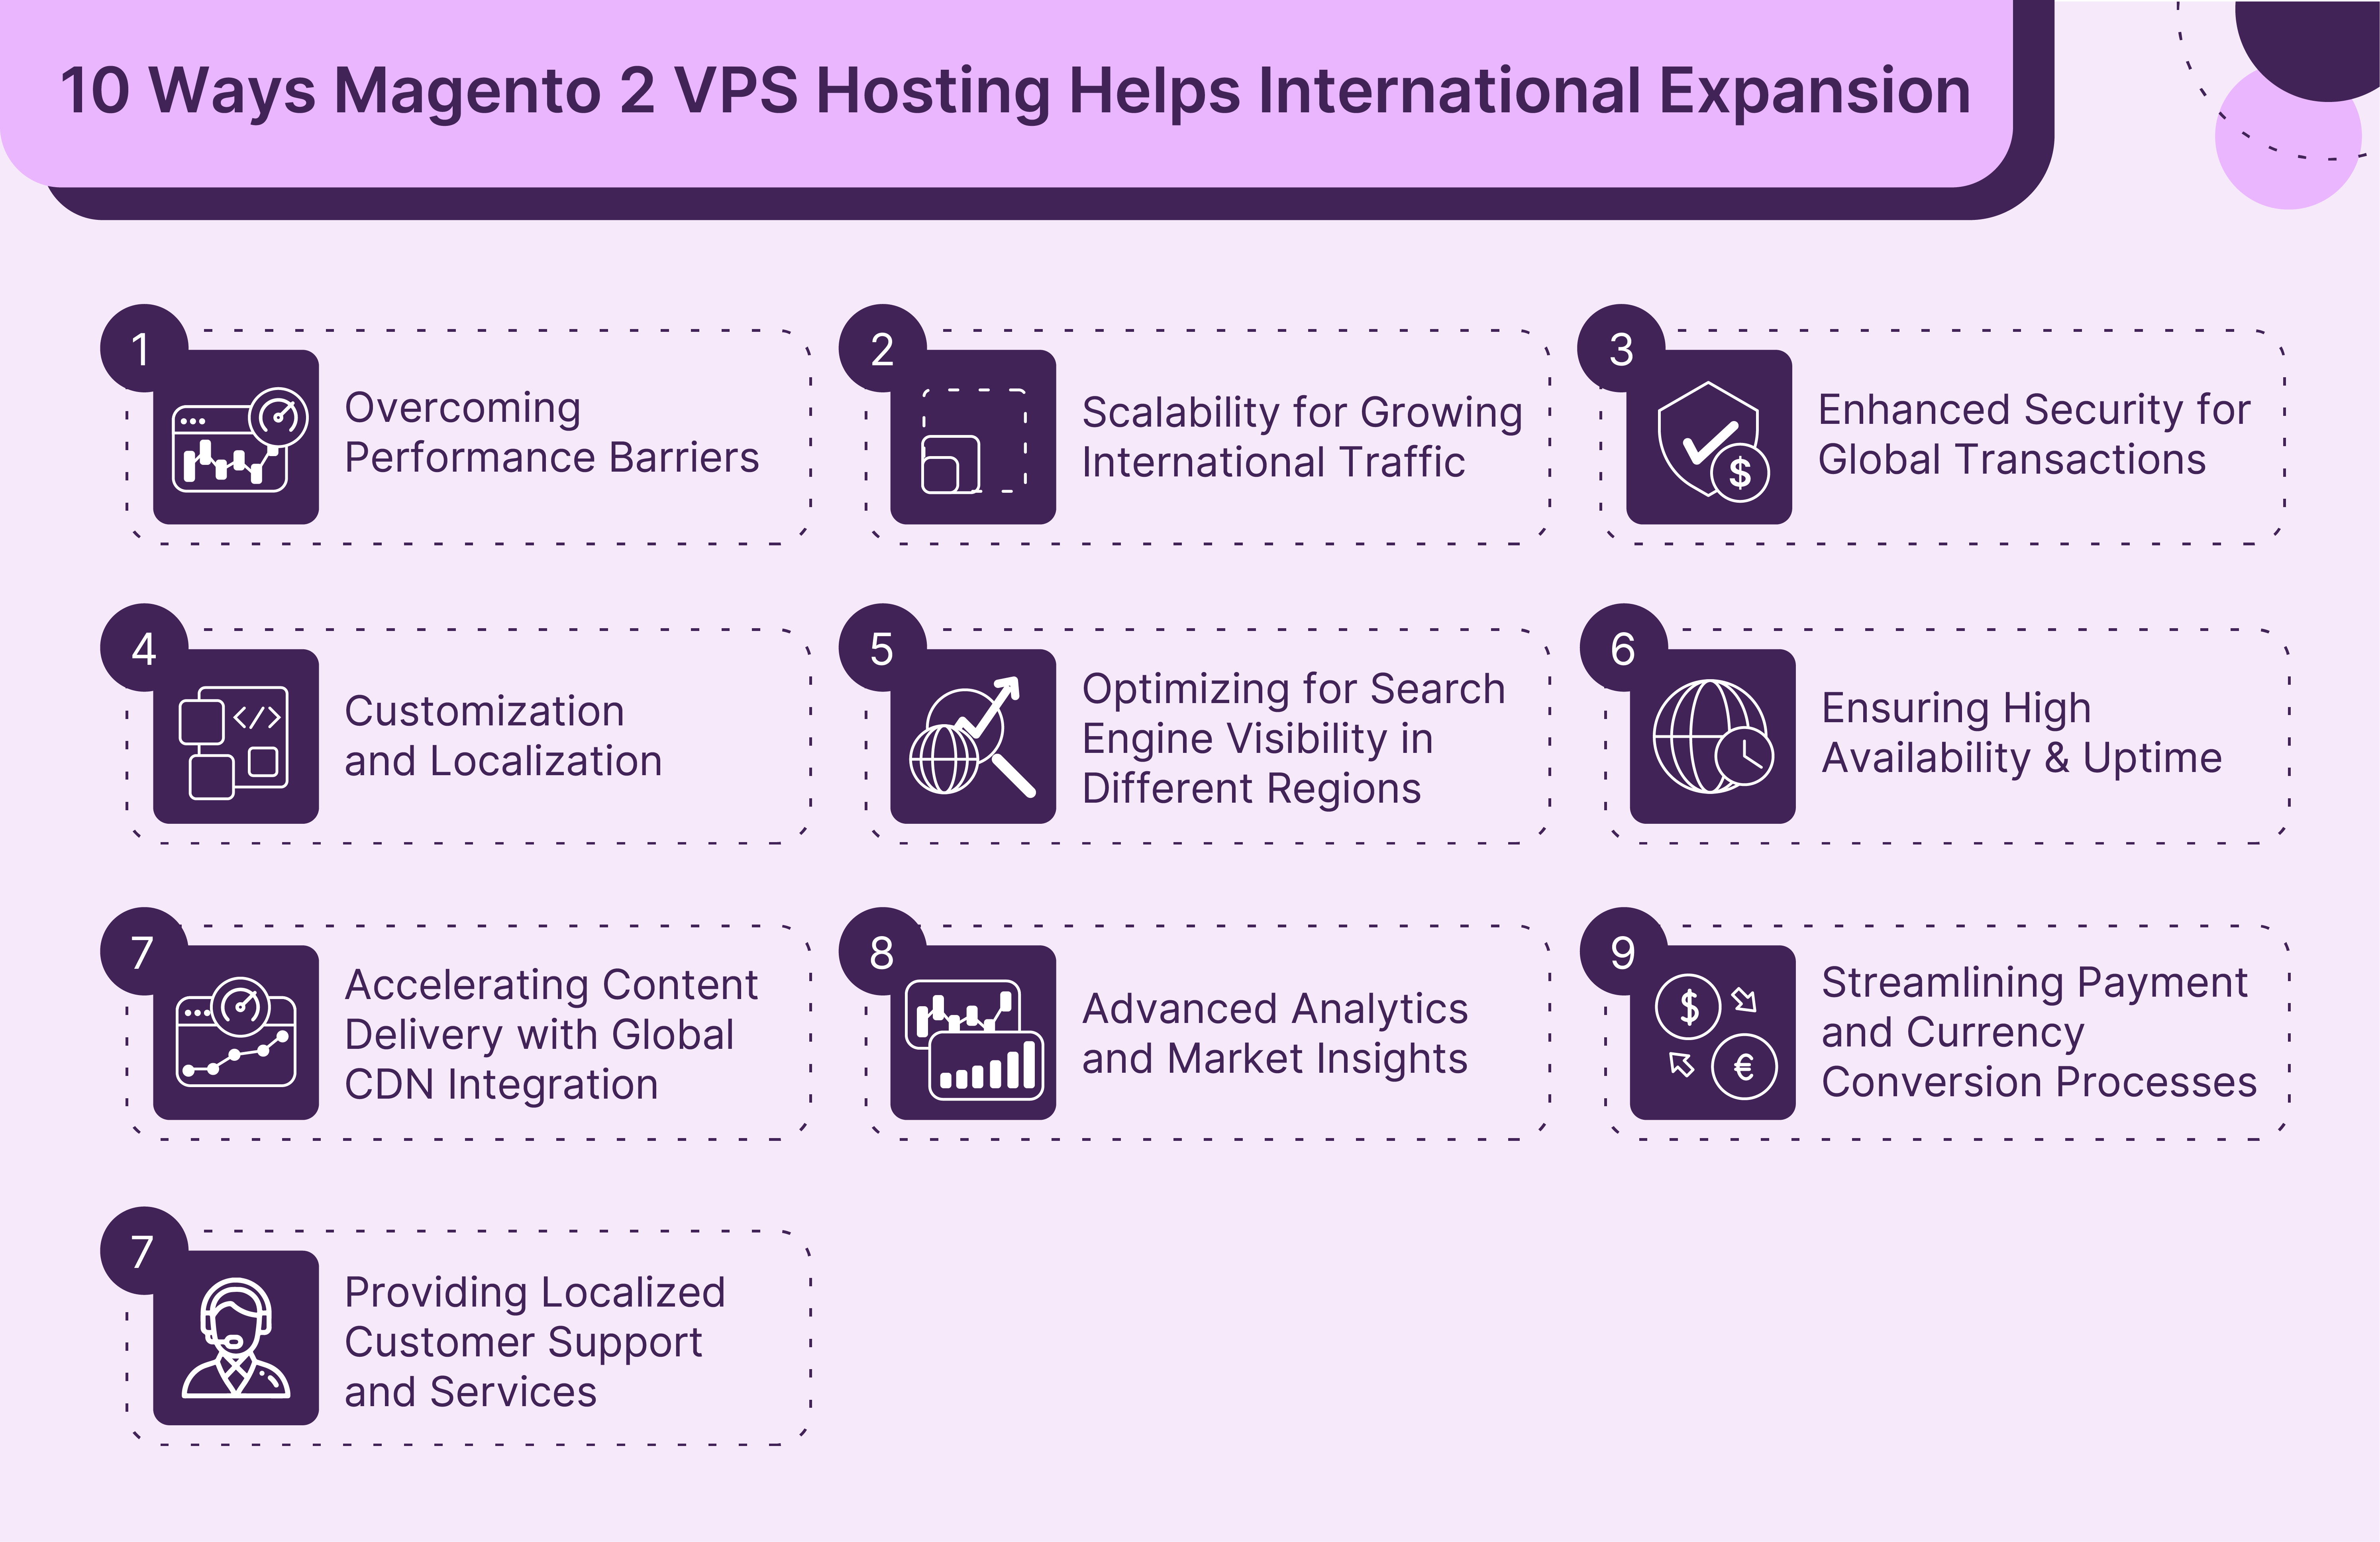 Features of Magento 2 VPS Hosting for Internation Expansion